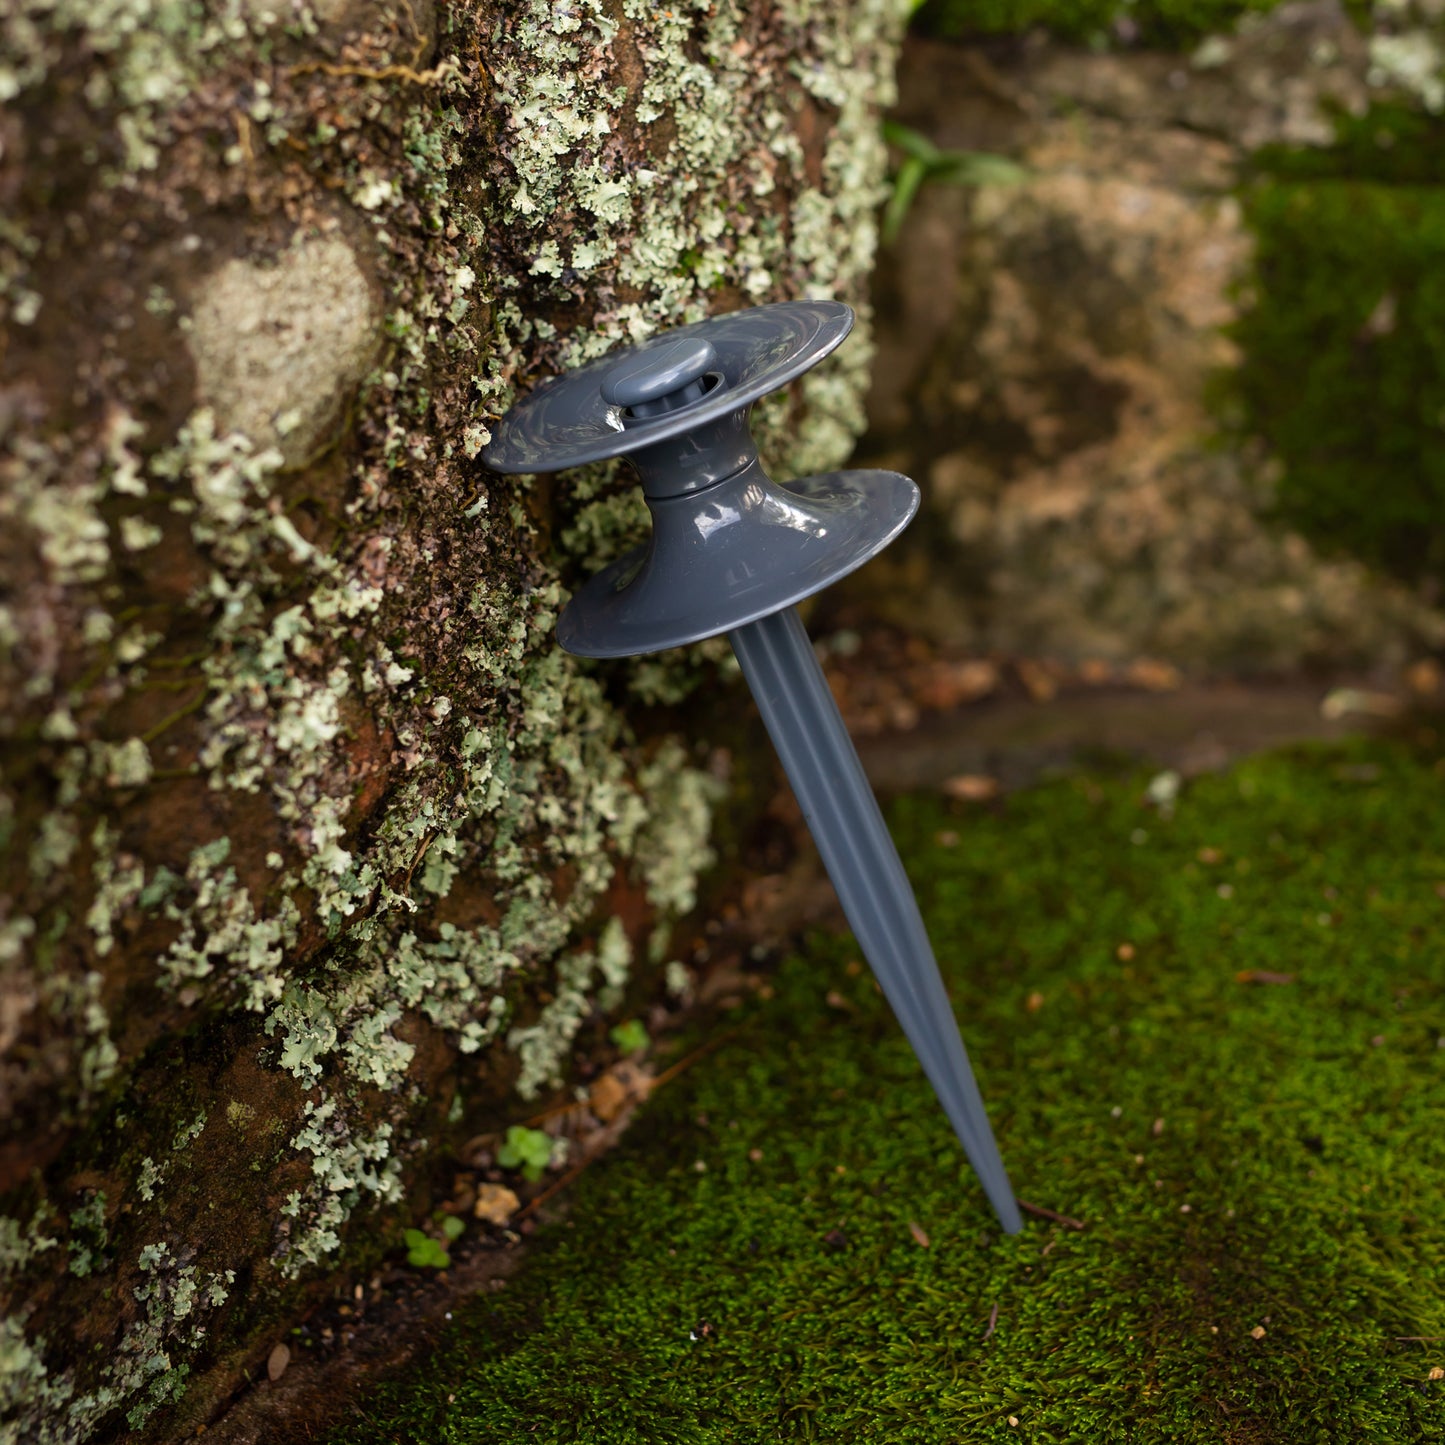 A charcoal colour ground hose guide leaning against a moss covered rock.